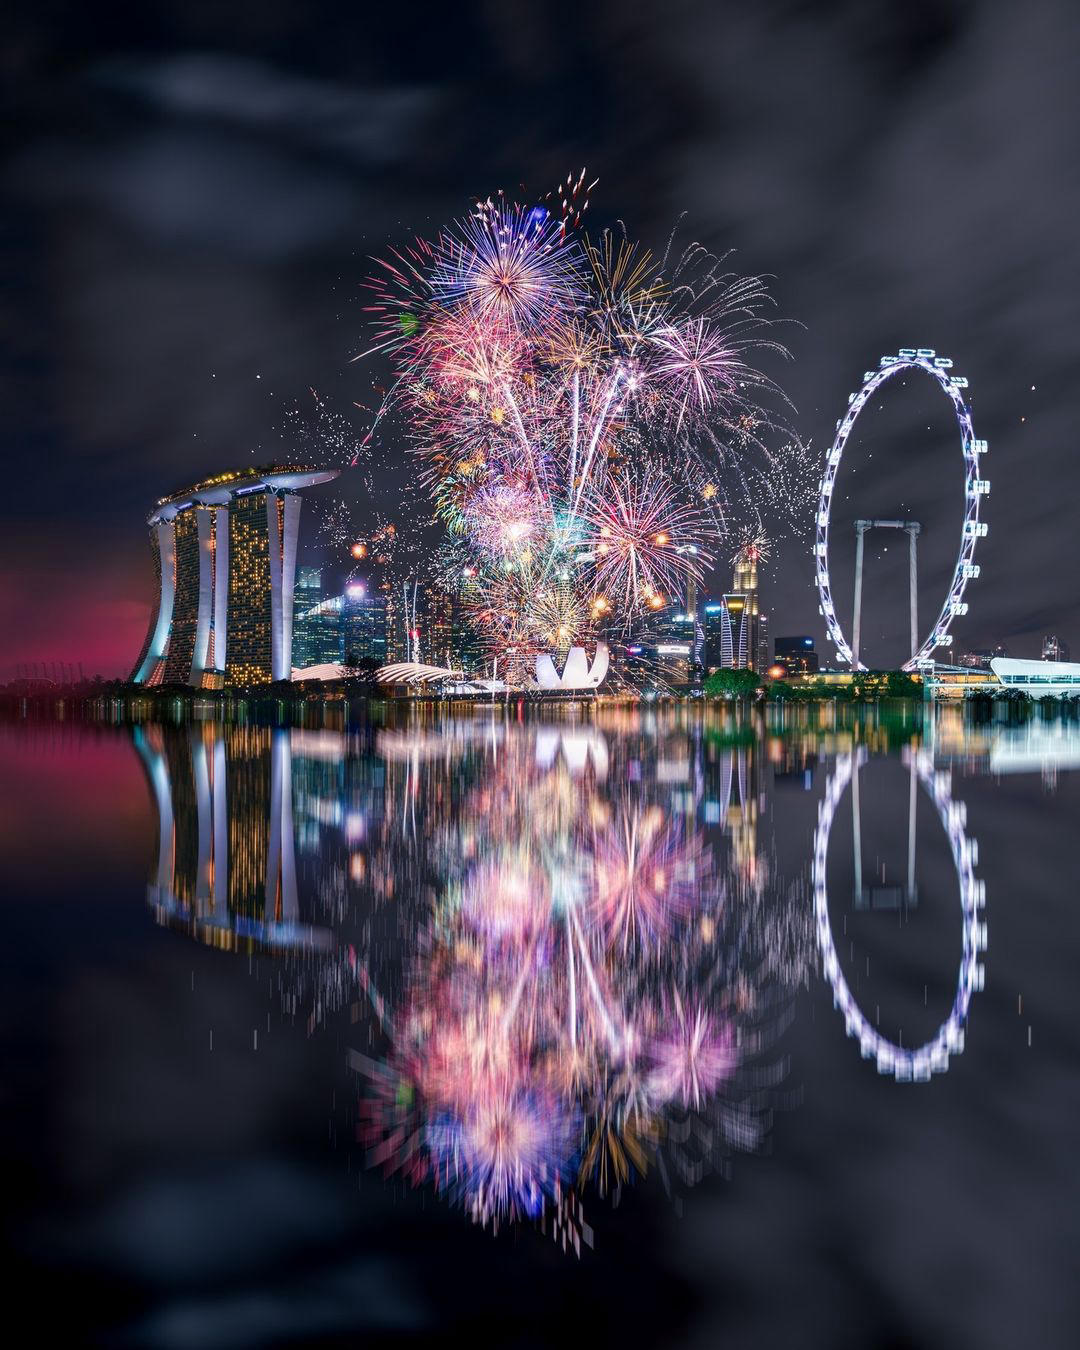 Marina Bay Sands - As the clock strikes 12 across the globe, cheers to the new year and 365 new chan